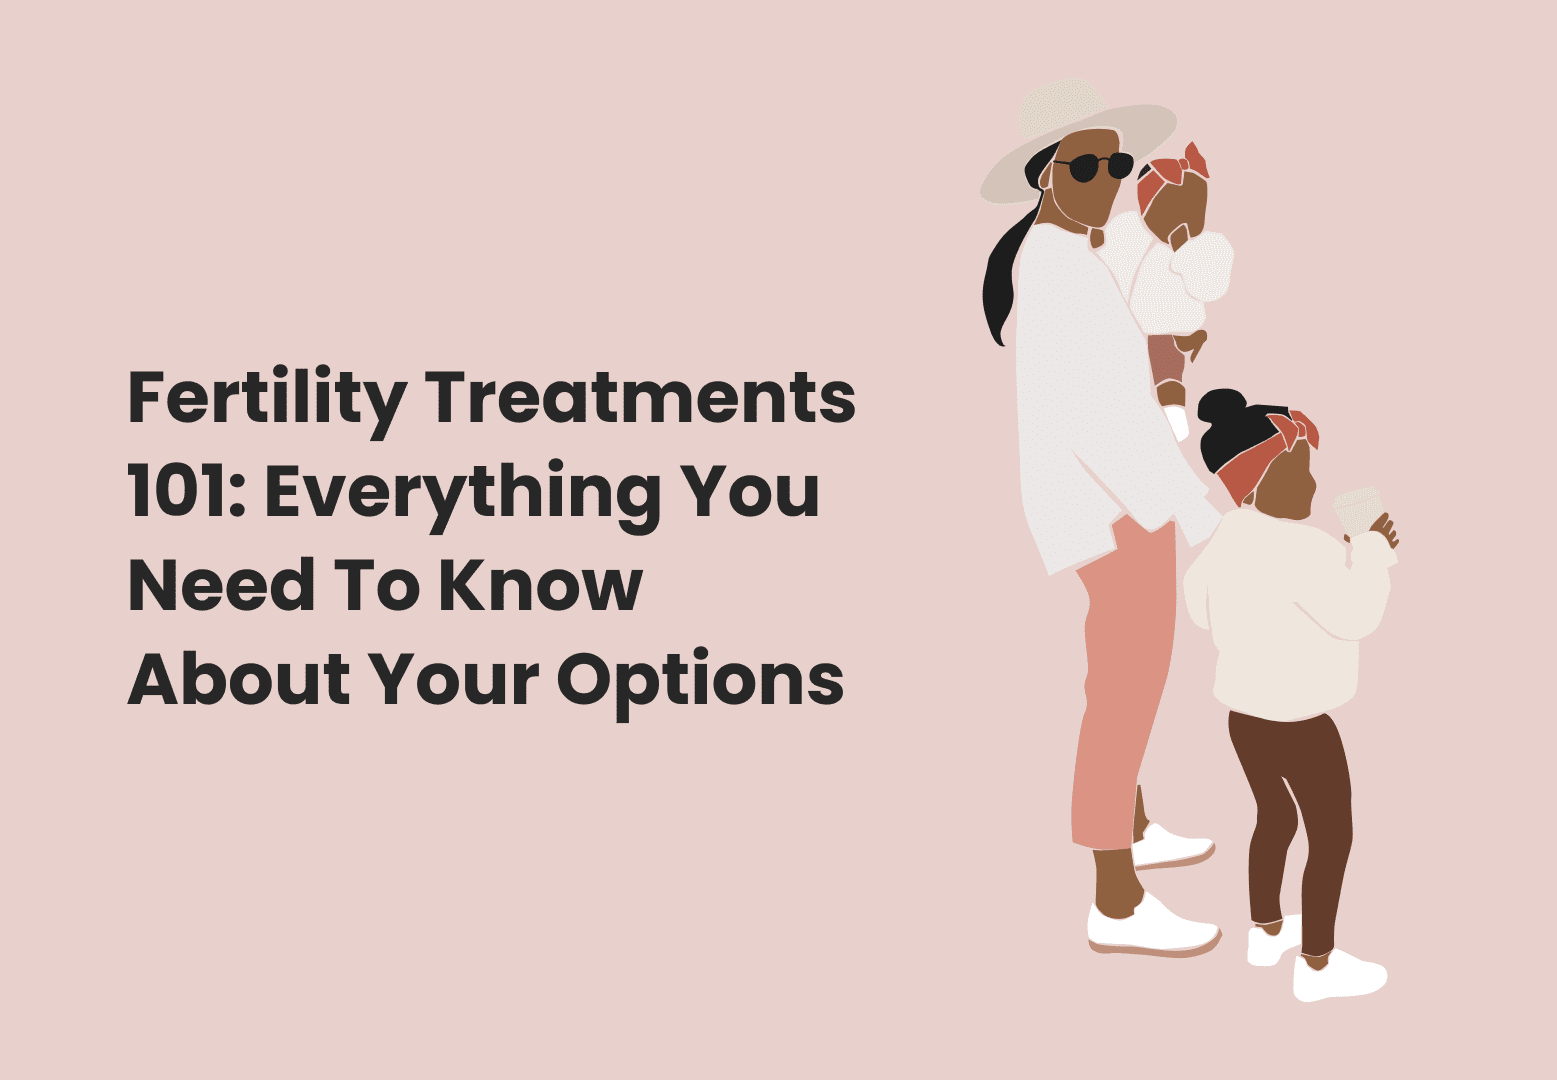 Fertility Treatments 101: Everything You Need To Know About Your Options